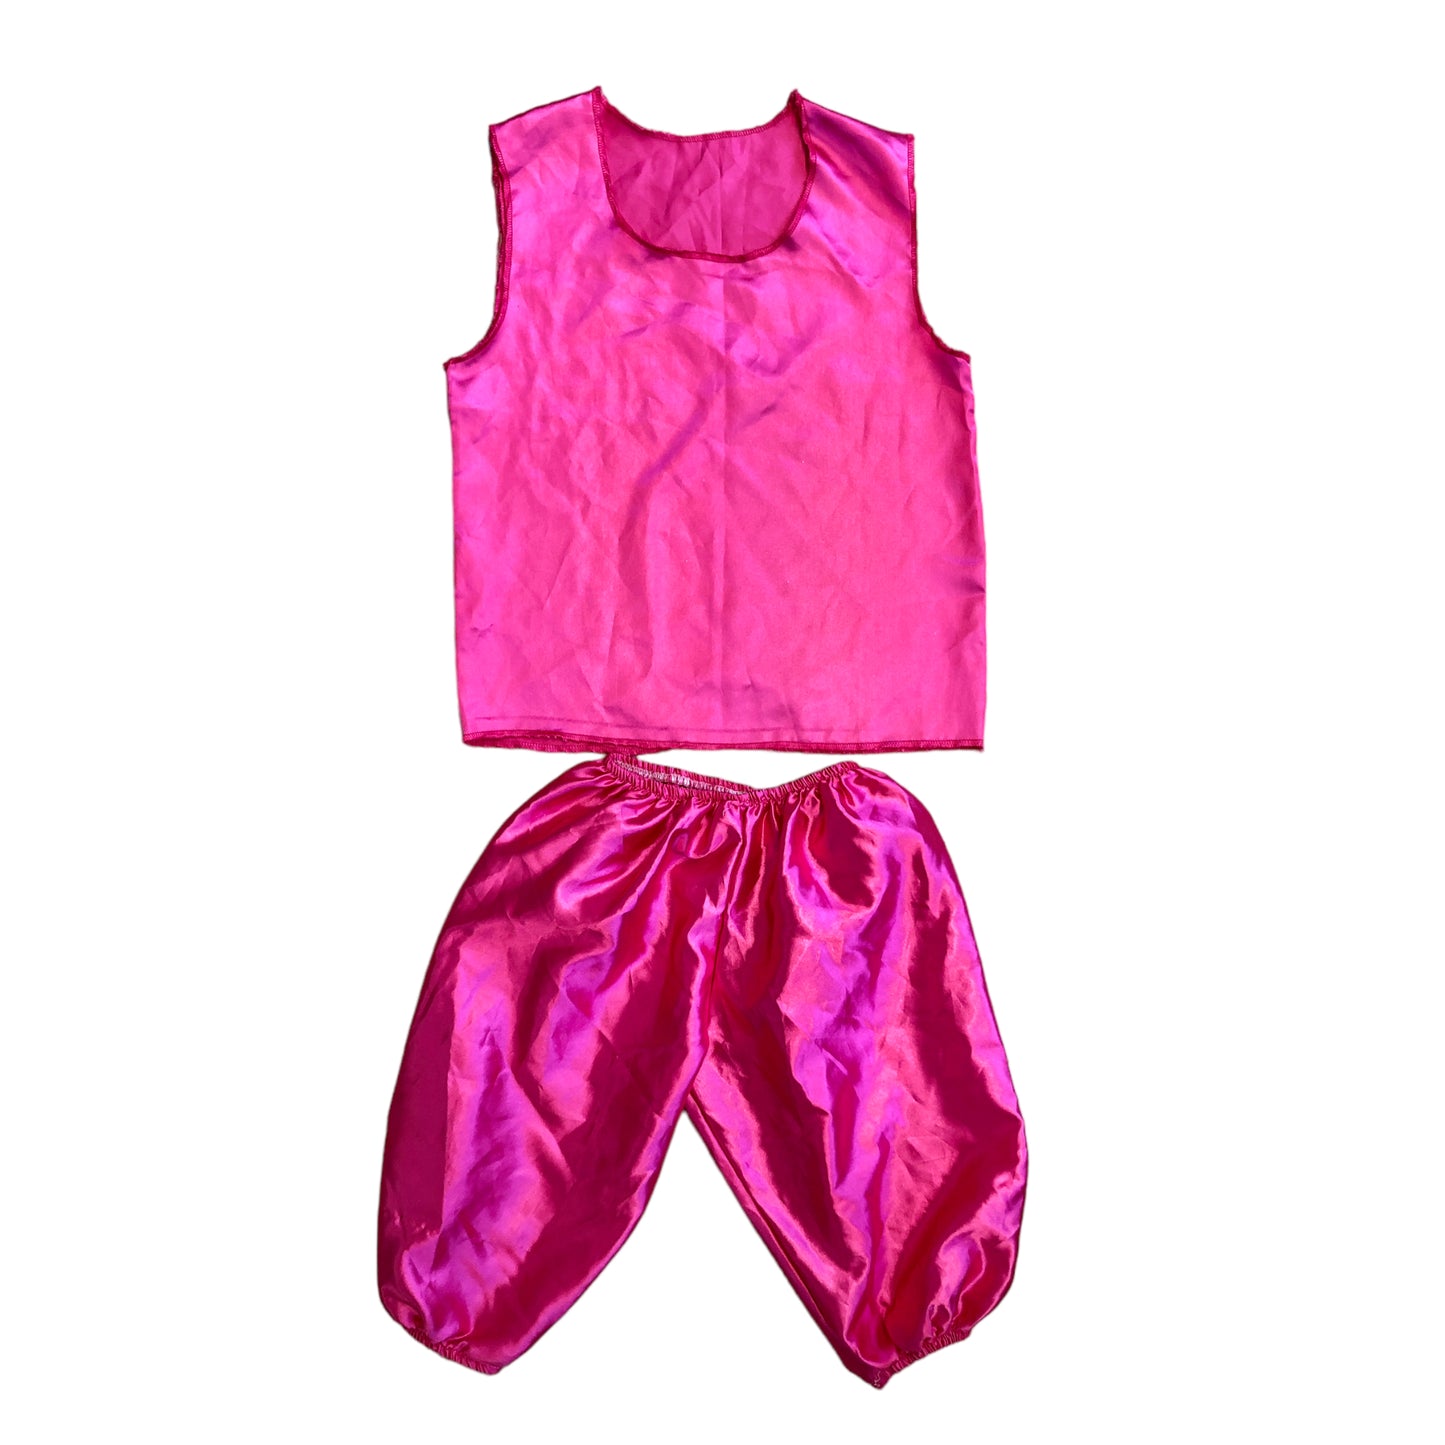 Indian Pink Dress (5 years old)